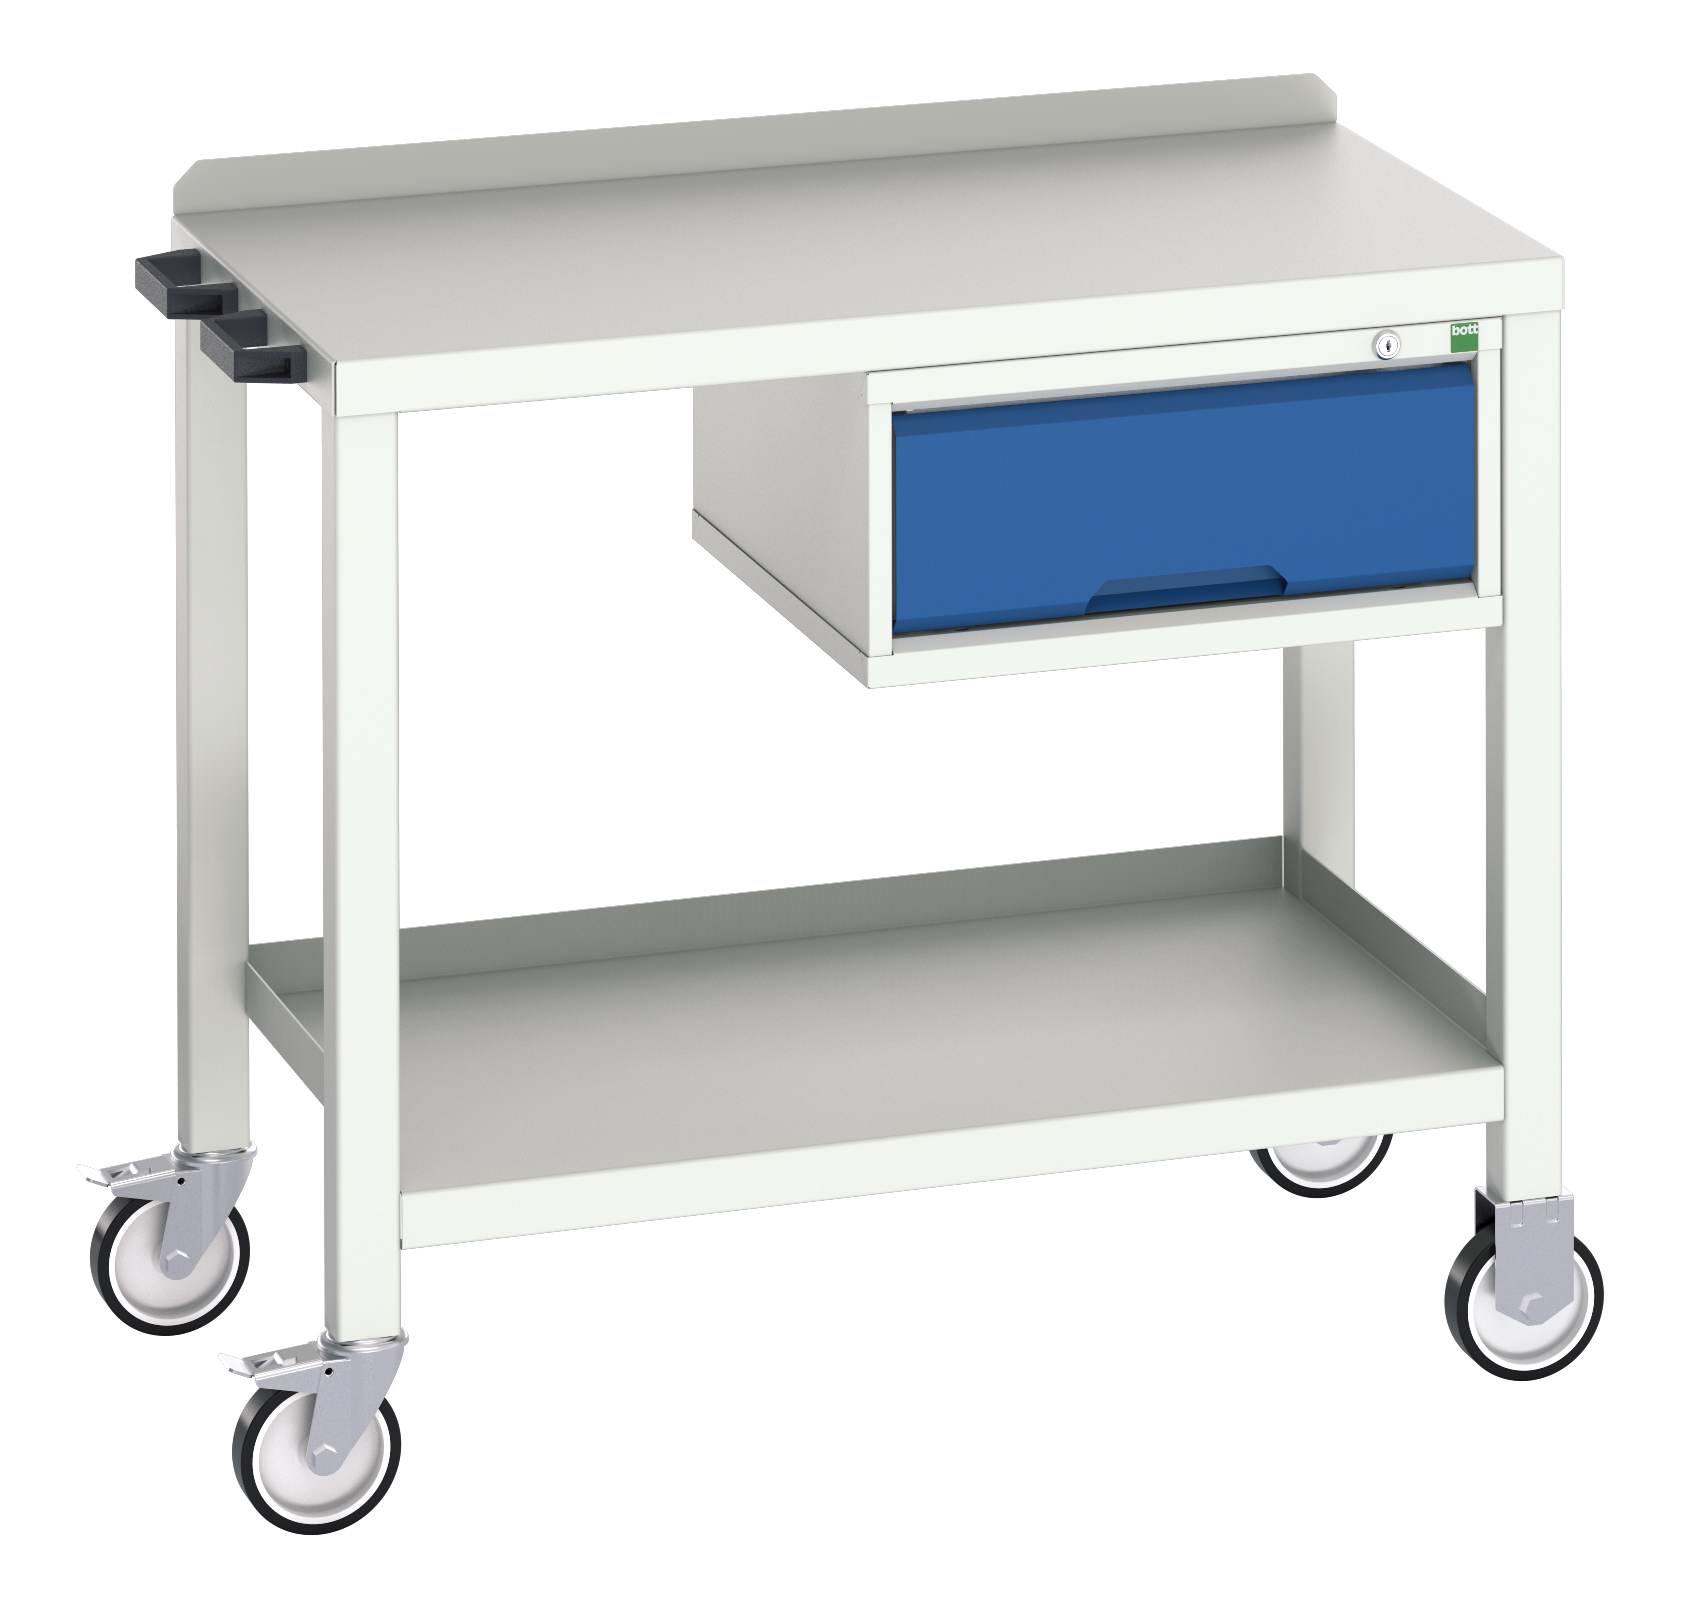 Bott Verso Mobile Welded Bench With 1 Drawer Cabinet - 16922800.11